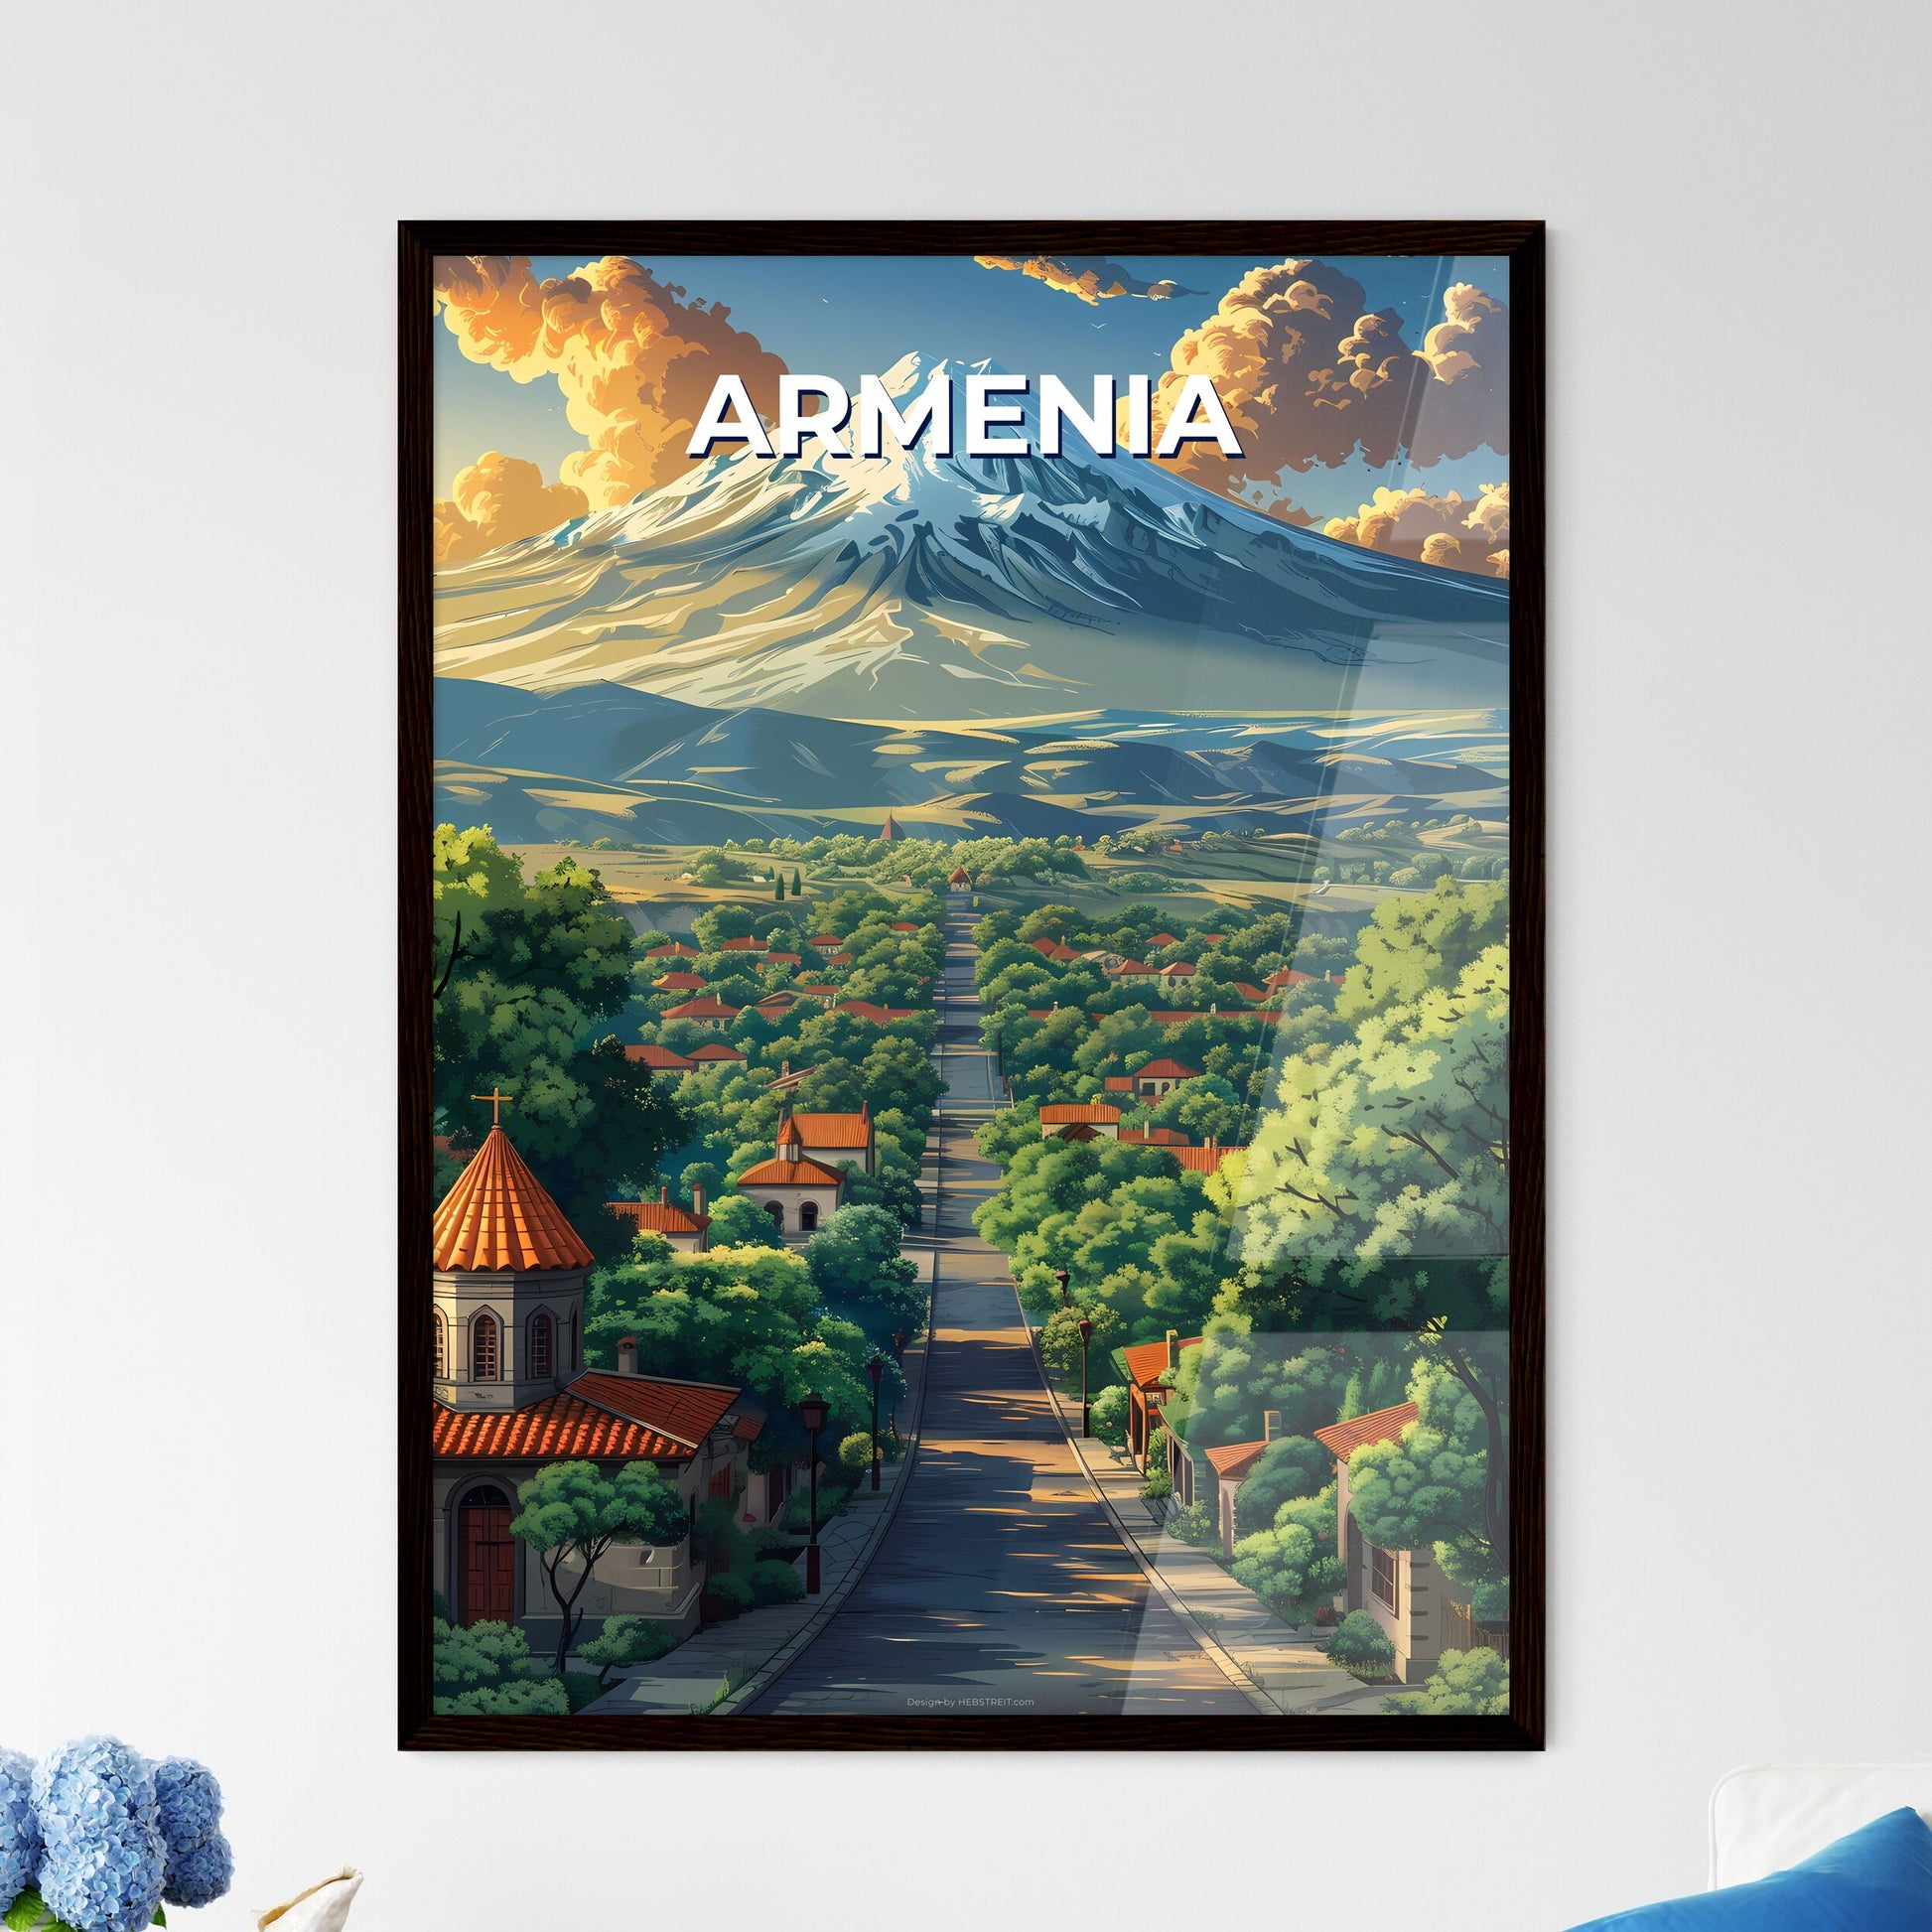 Armenia, Europe - Vibrant Painting of a Road Leading to a Mountainous Landscape With Armenian Artistic Style